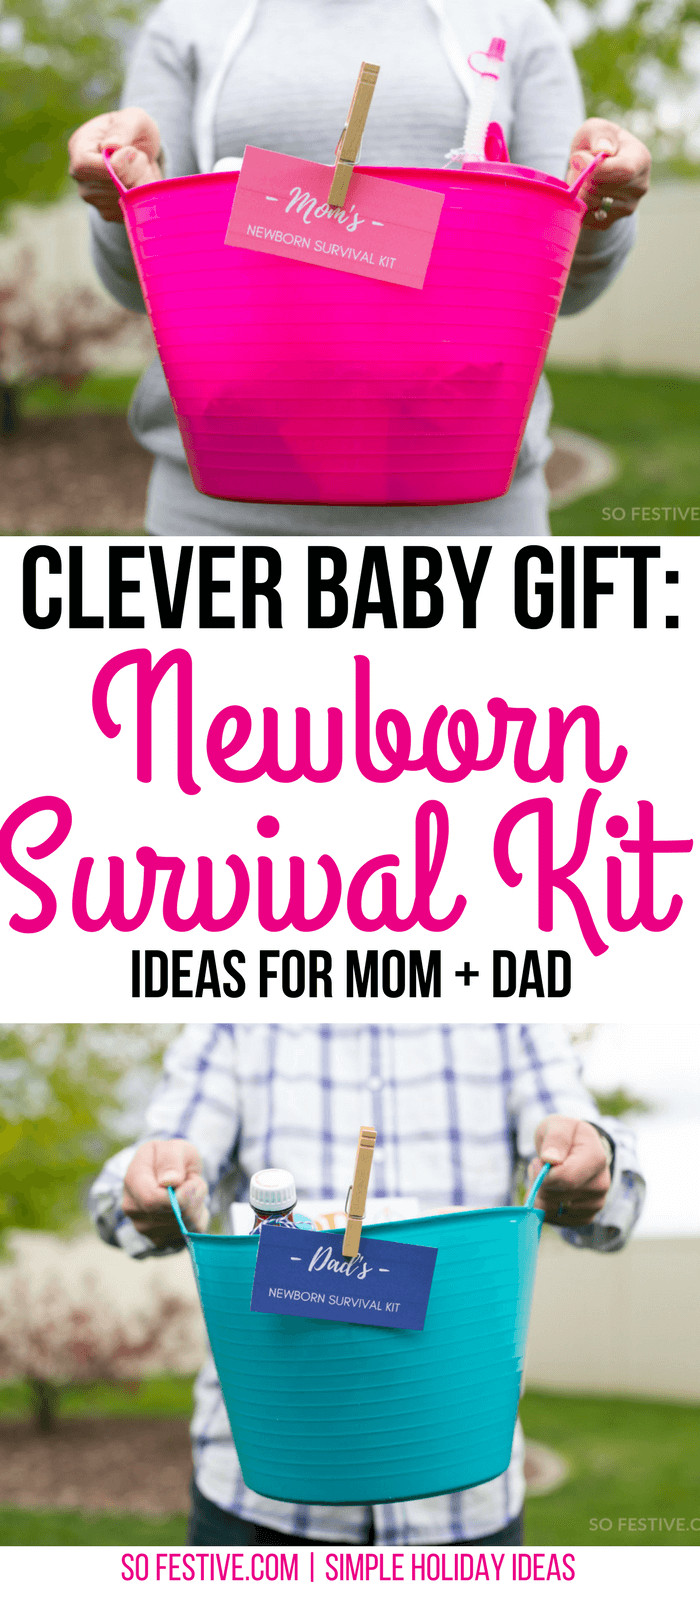 Baby Gifts For Parents
 Newborn Survival Kit Baby Gift For Parents So Festive